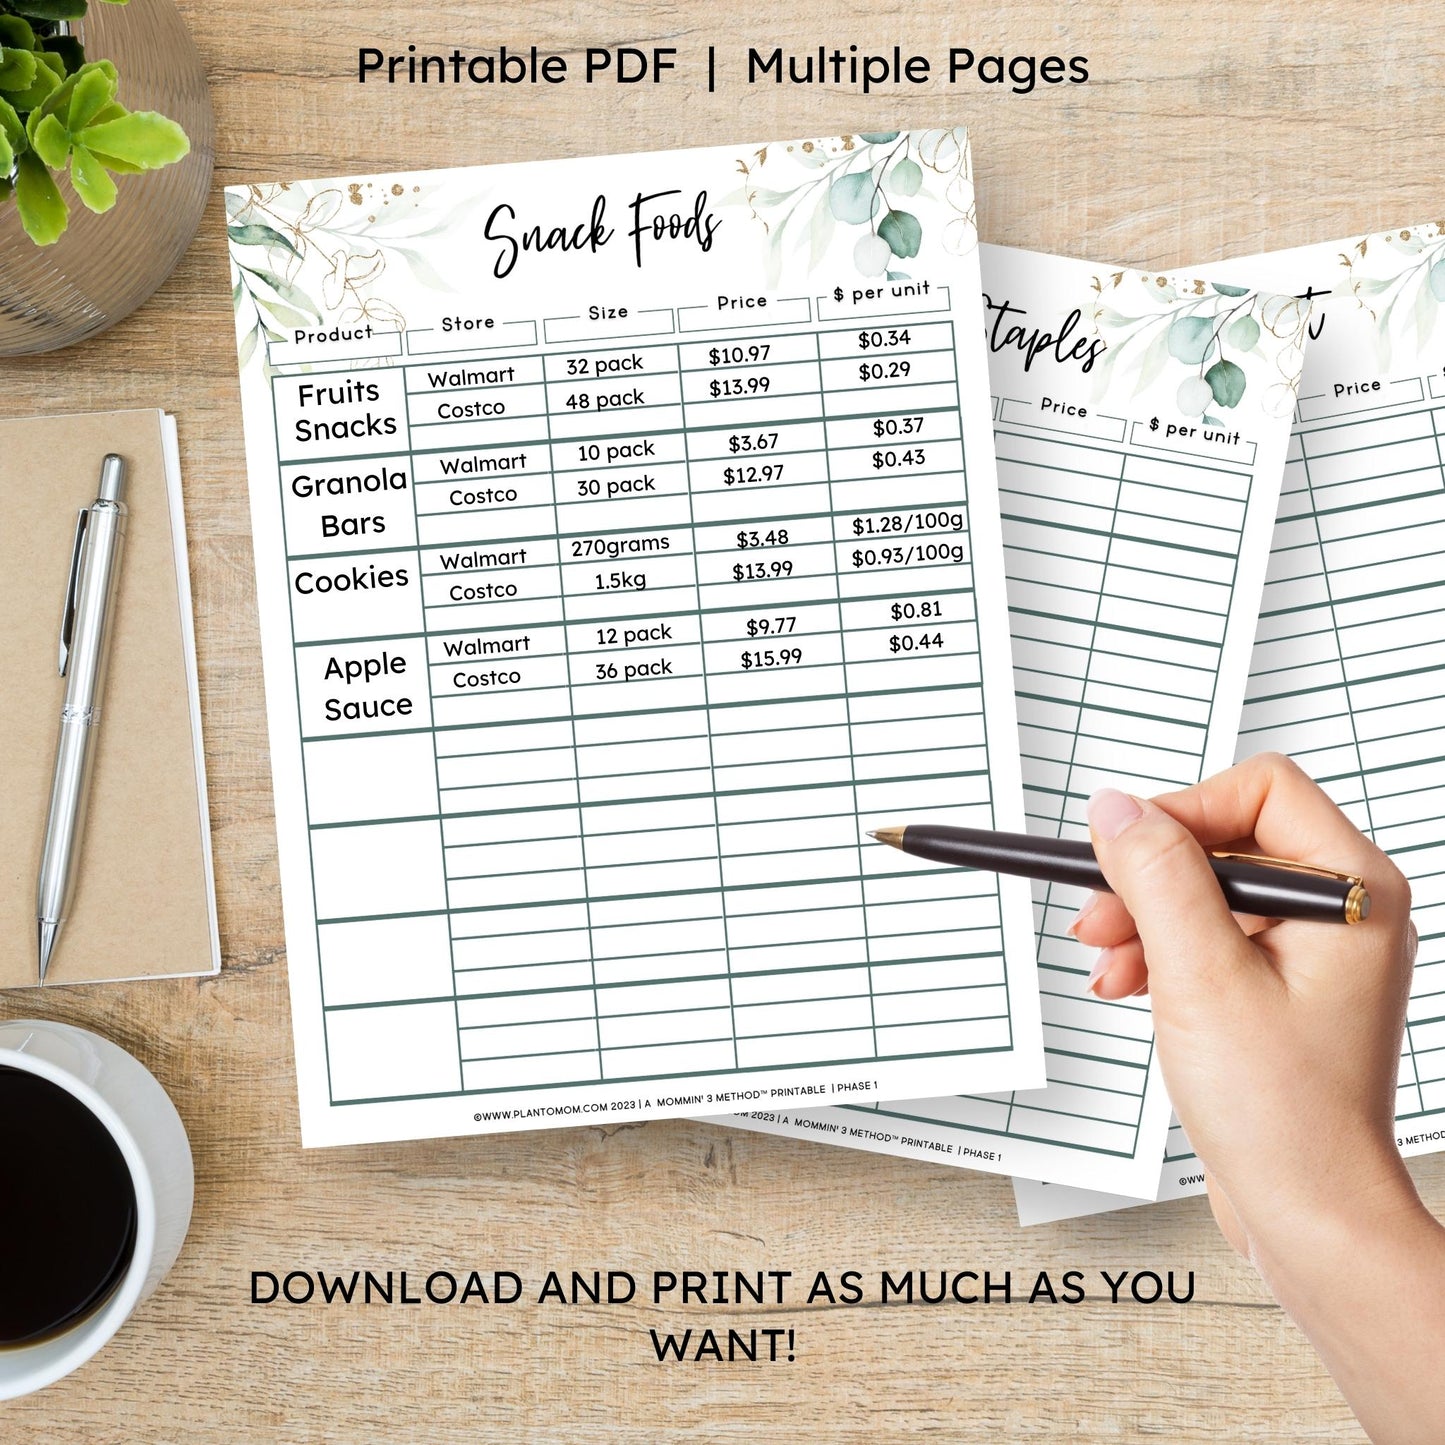 Grocery Assistant - Eucalyptus - Printable PDF - US LETTER